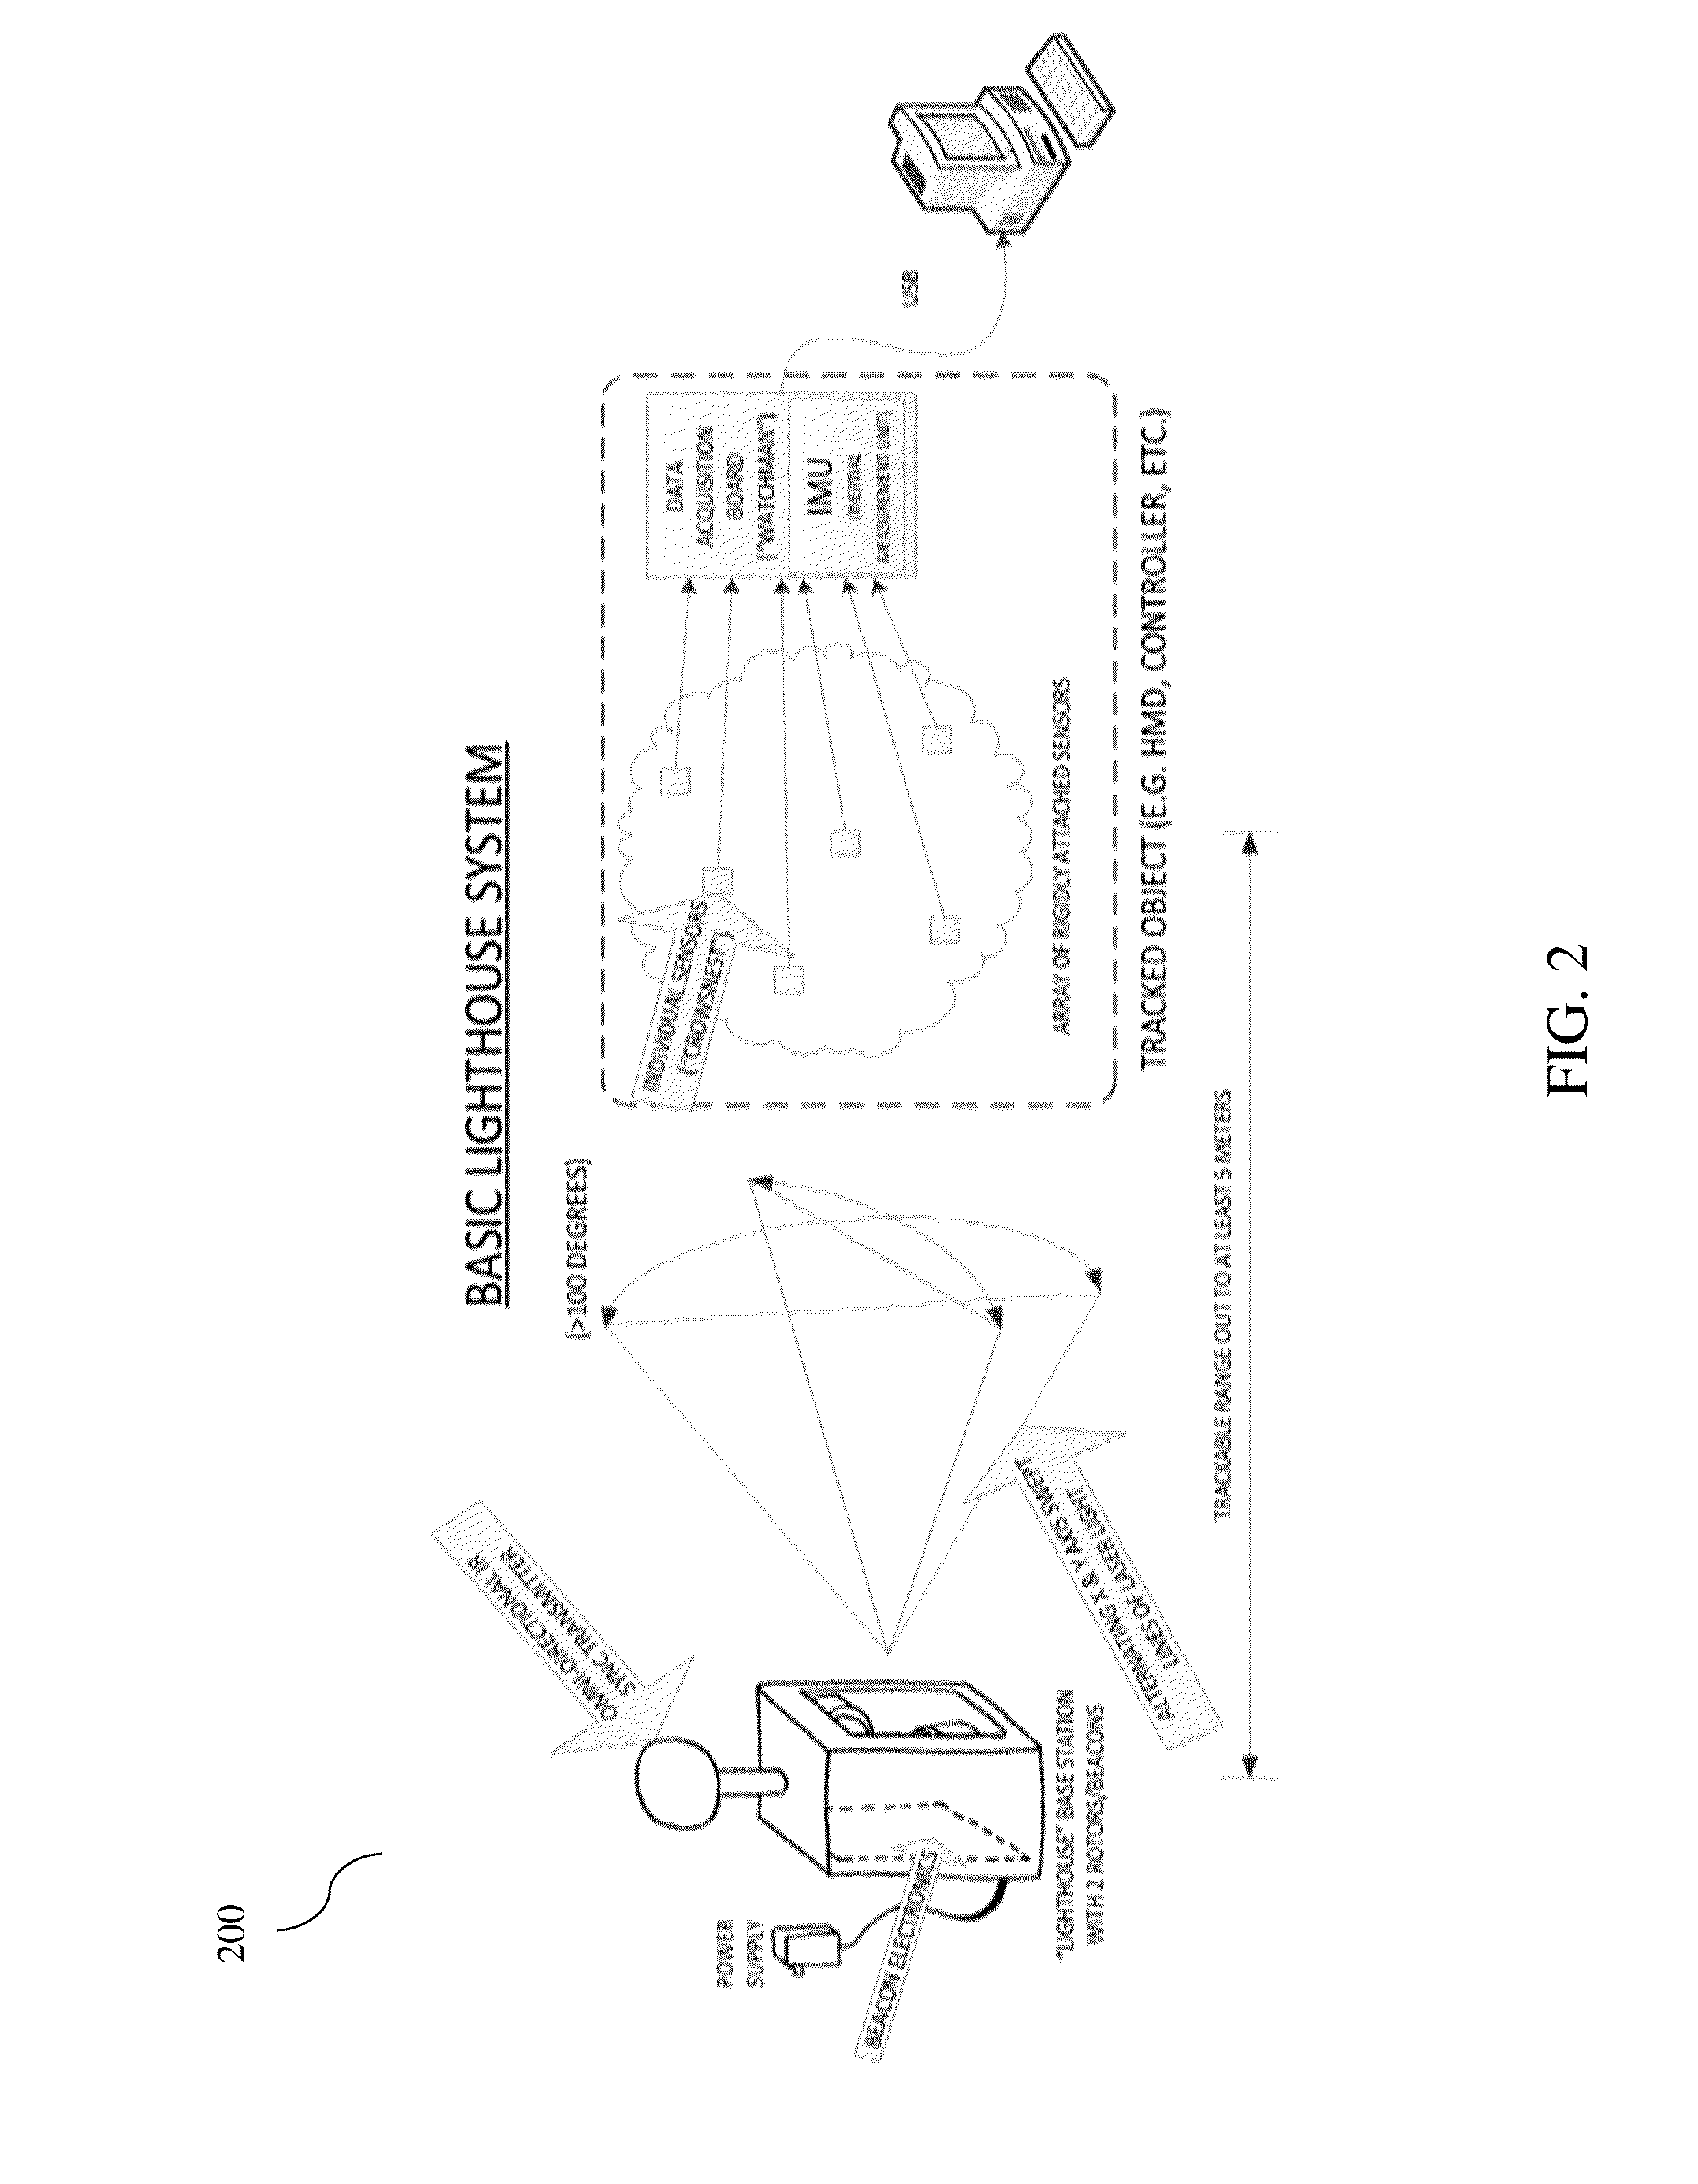 Positional tracking systems and methods